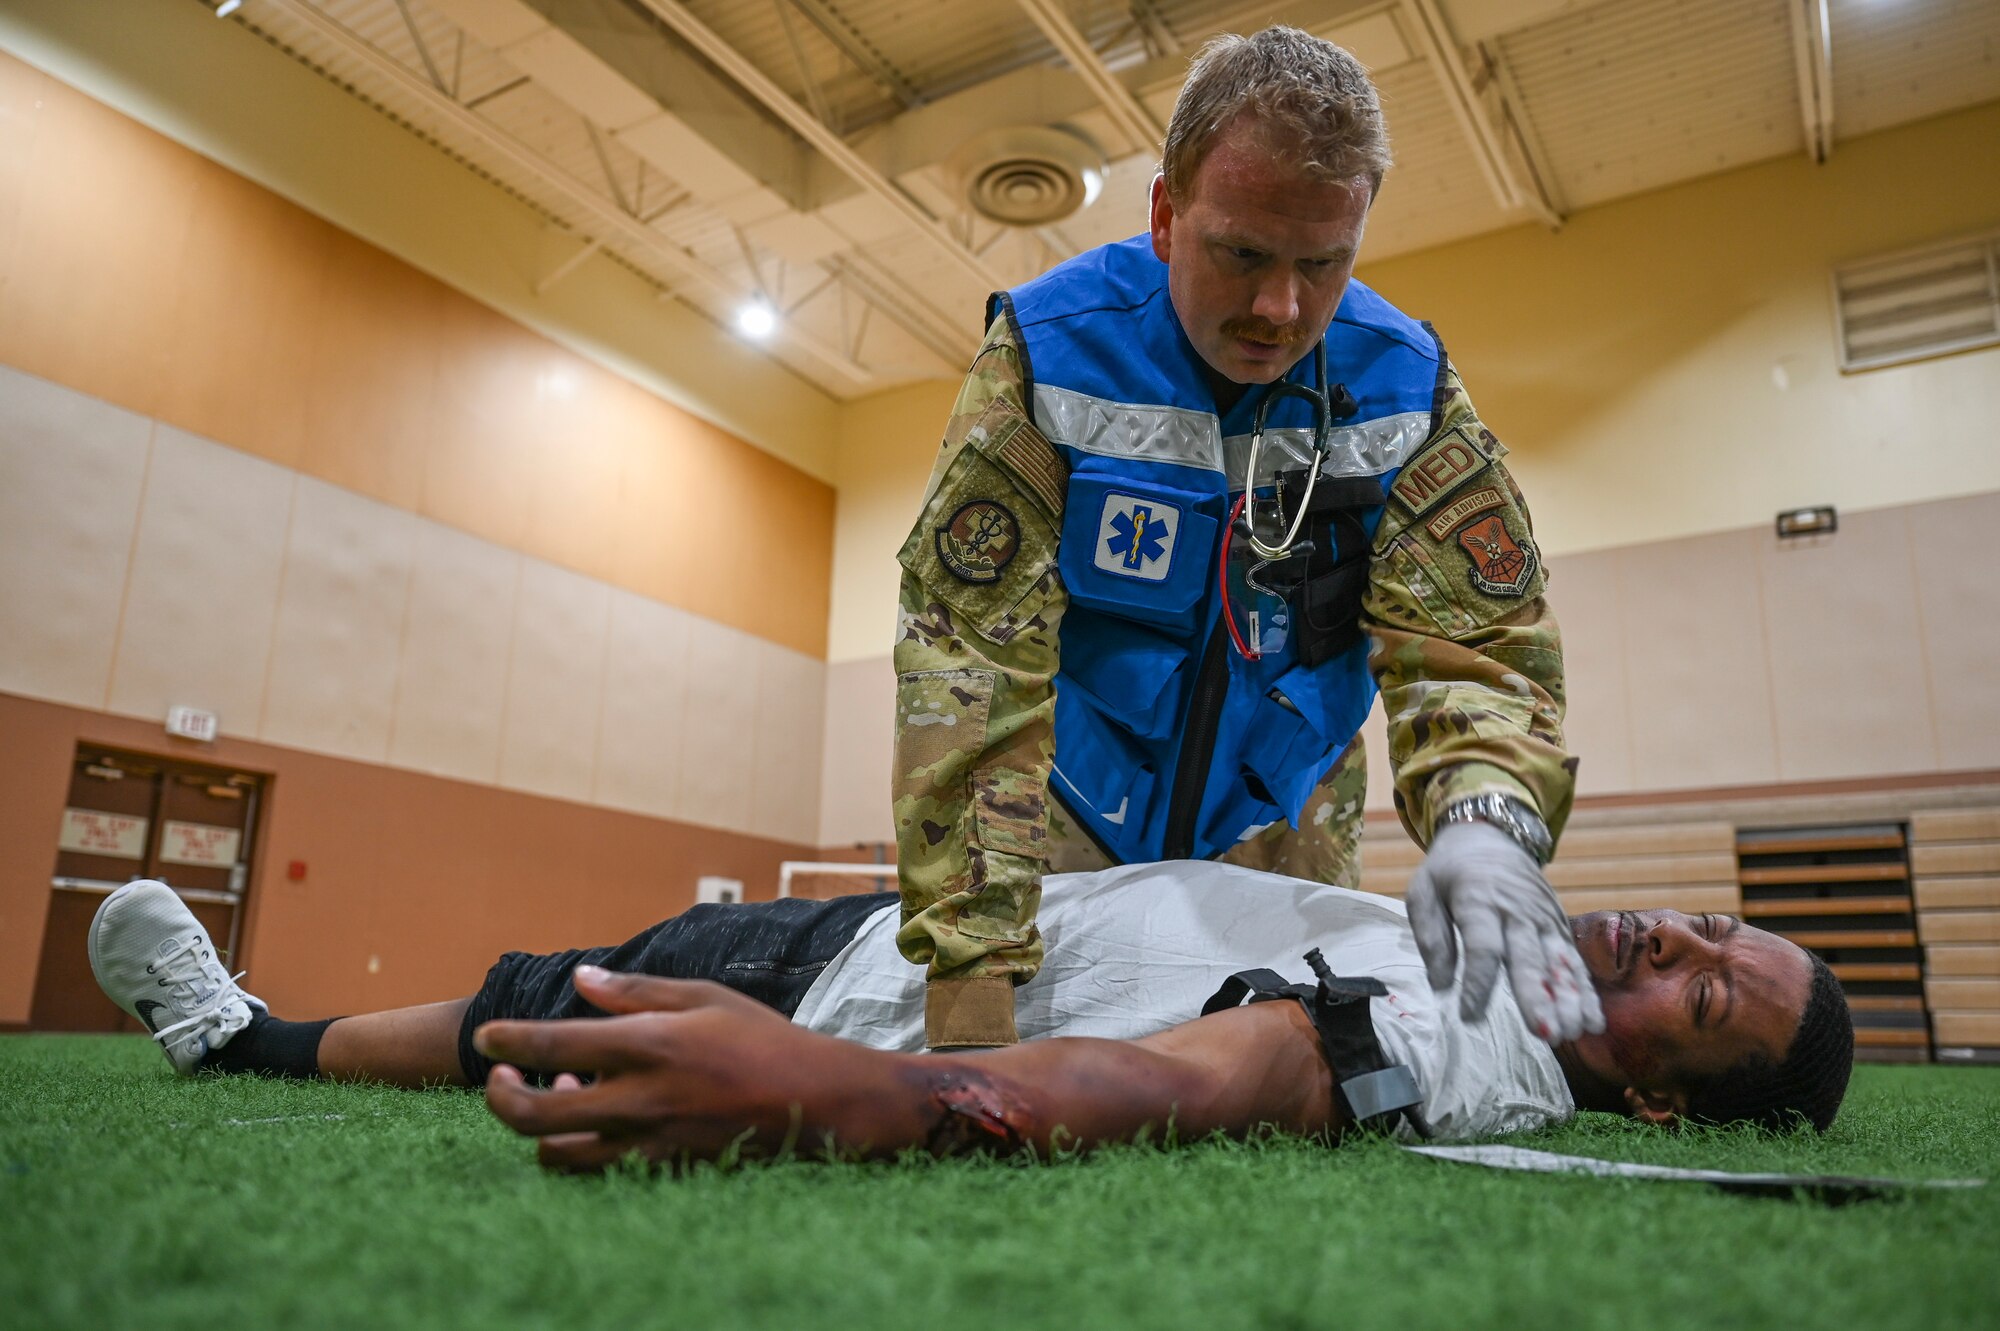 An Airman from the 341st Medical Group treats a simulated casualty during Ready EAGLE II, a training exercise held biennially at Malmstrom Air Force Base, Mont., Sept. 21, 2023. Prior to the exercise, the Ready EAGLE II contractor provided hands-on training and tabletop exercise for 341 MDG’s command, field response and decontamination teams. (U.S. Air Force photo by Senior Airman Breanna Christopher Volkmar)